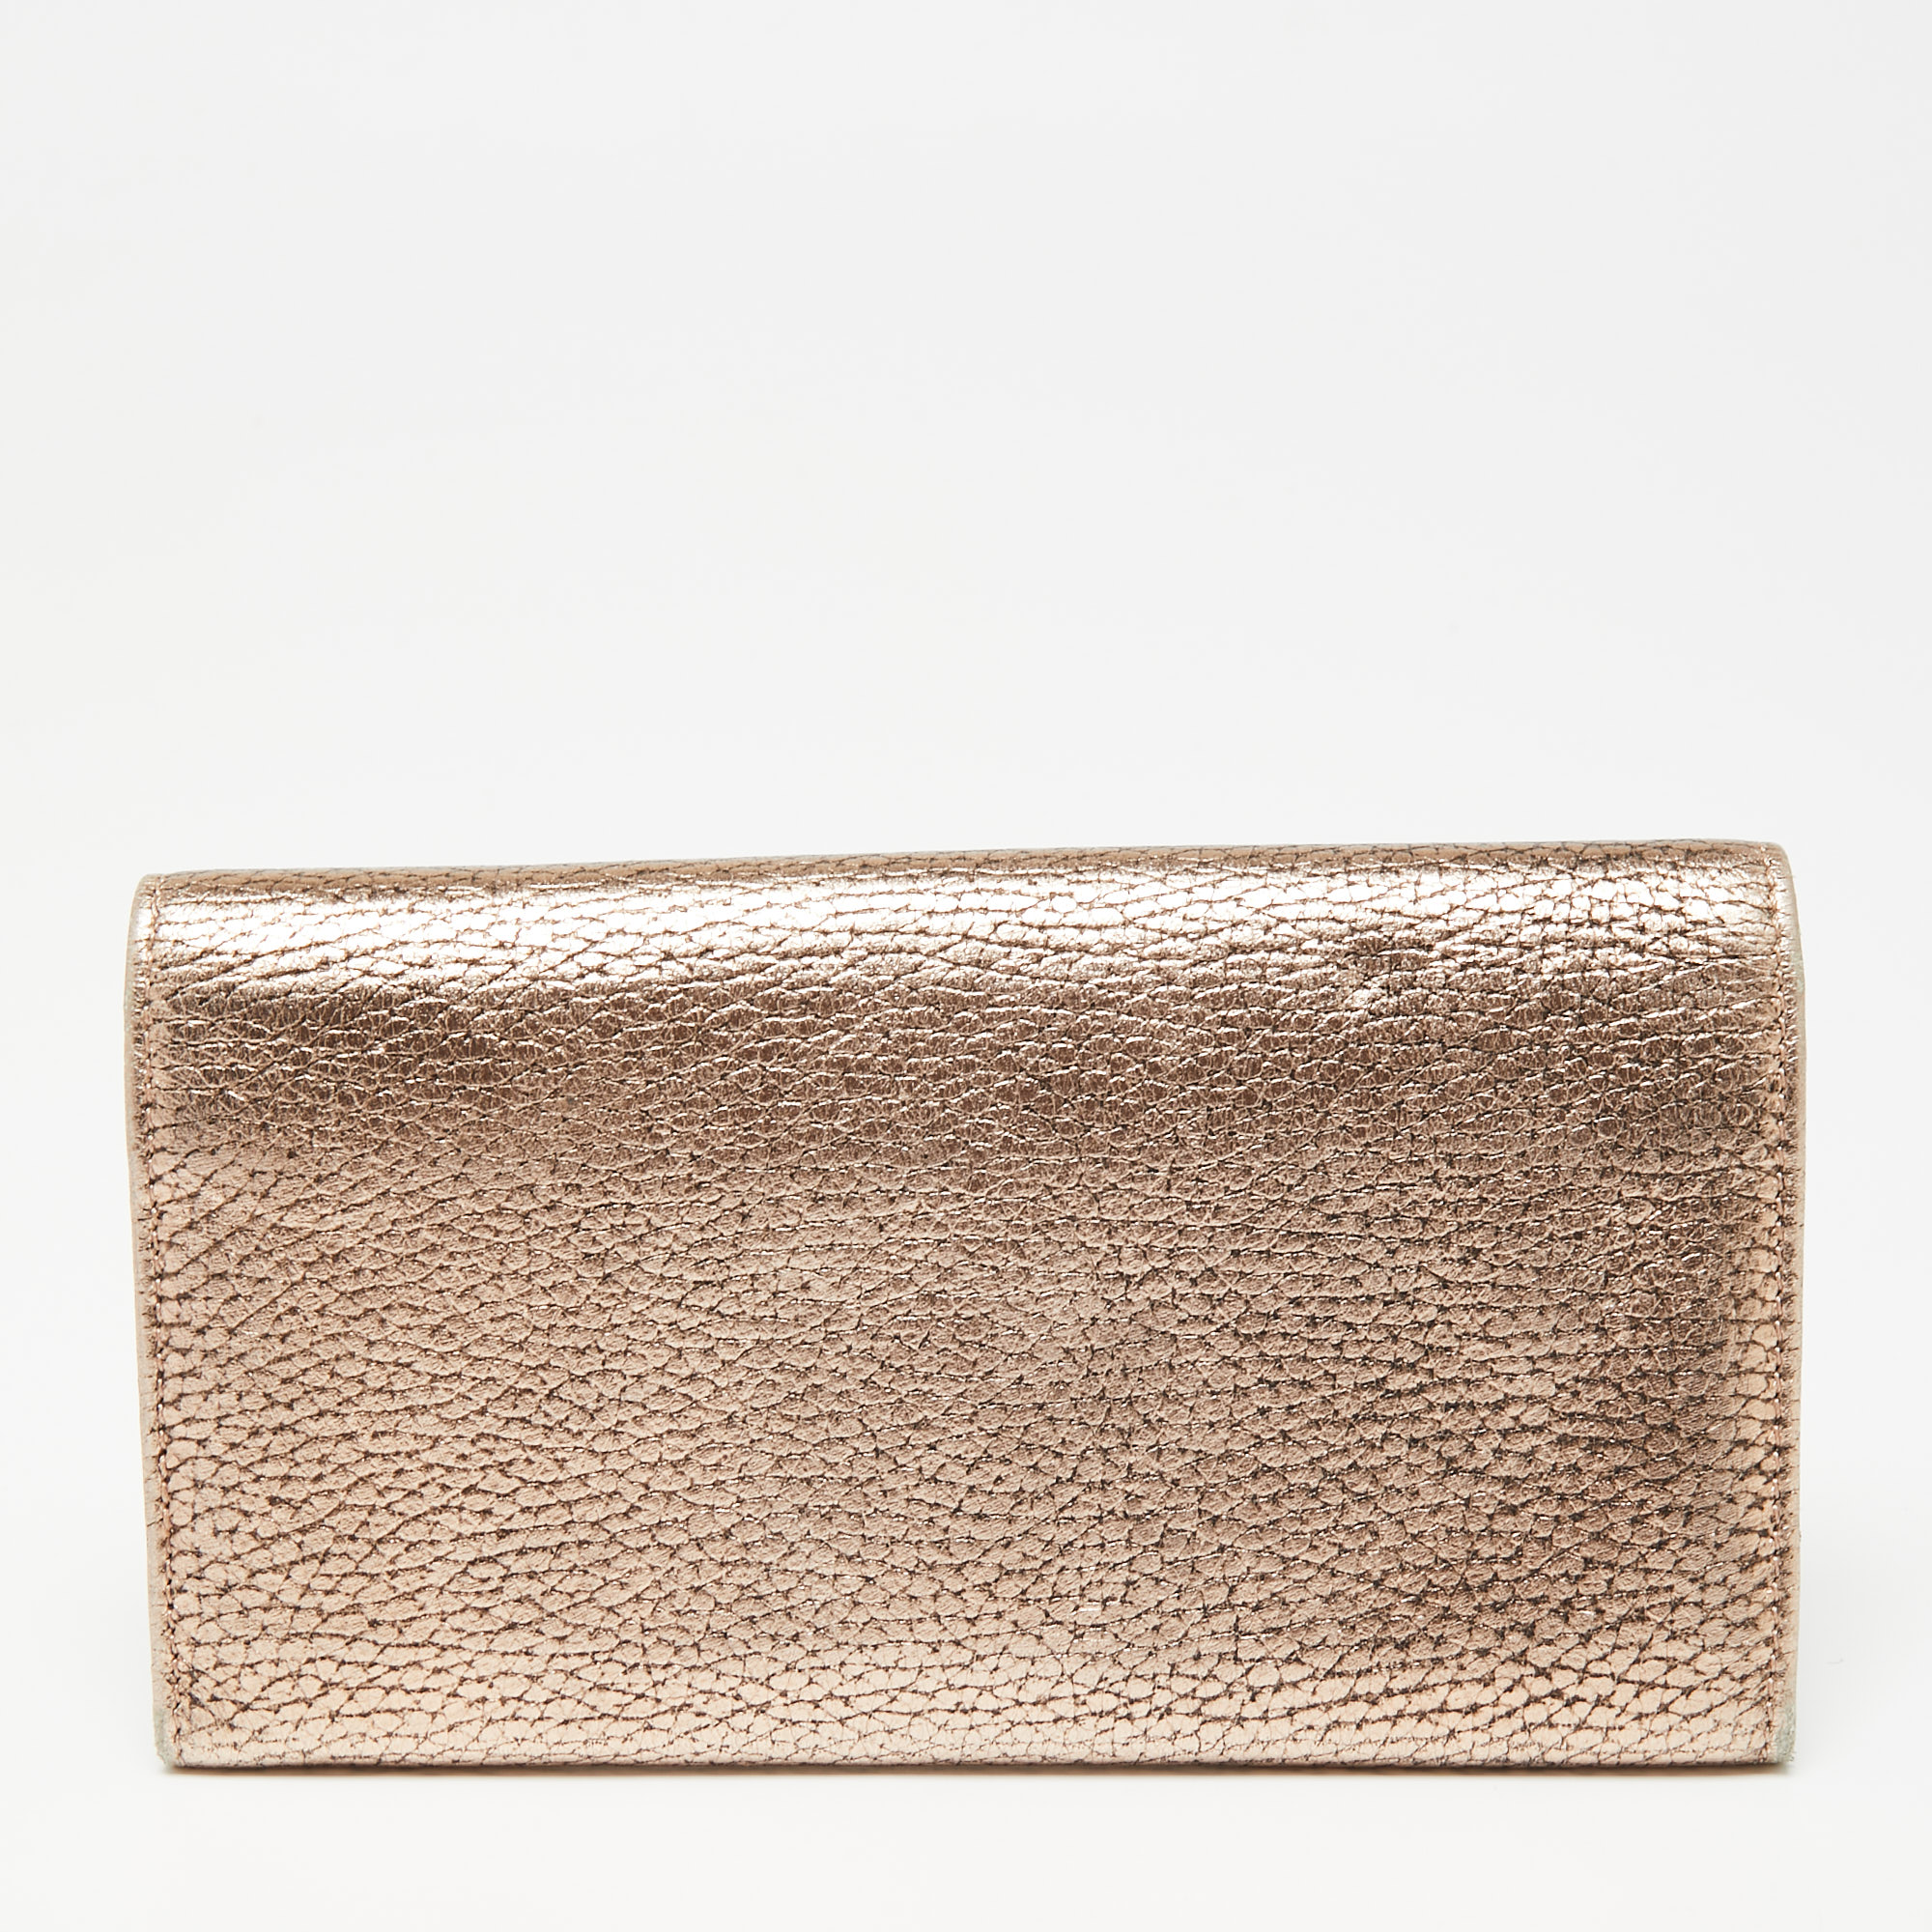 Jimmy Choo Metallic Rose Gold Leather Flap Continental Wallet